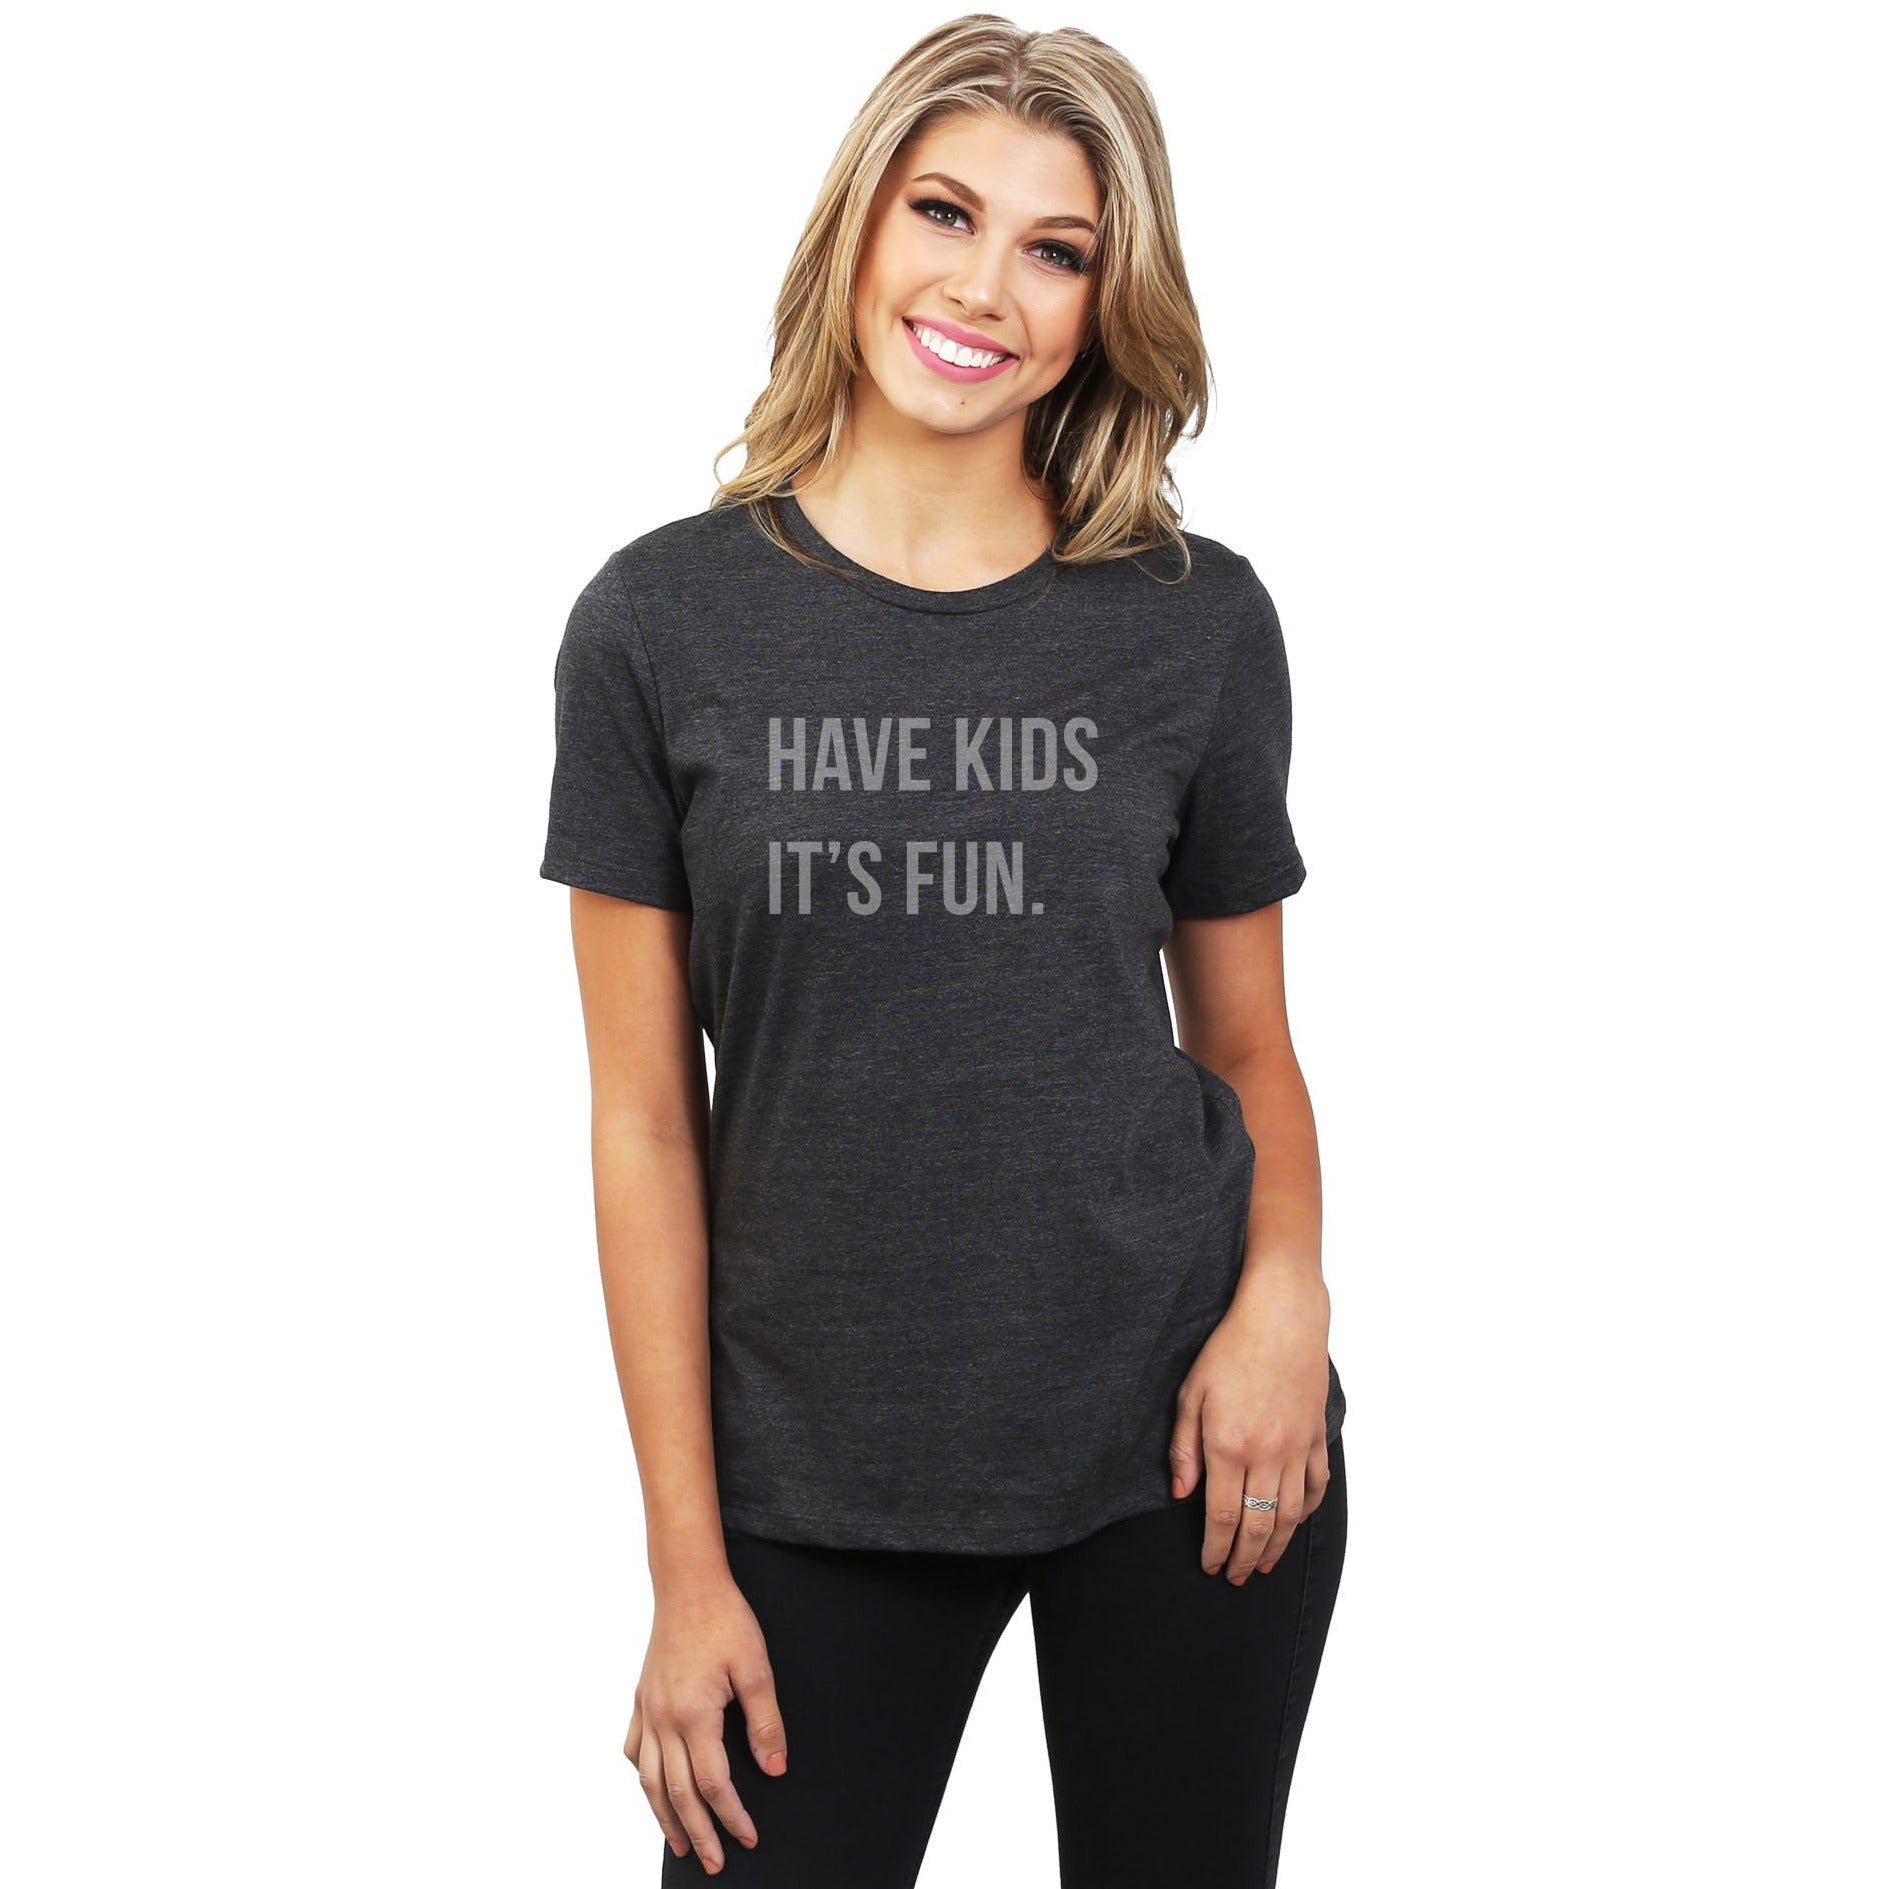 Have Kids It's Fun Women's Relaxed Crewneck T-Shirt Top Tee Charcoal Grey Model